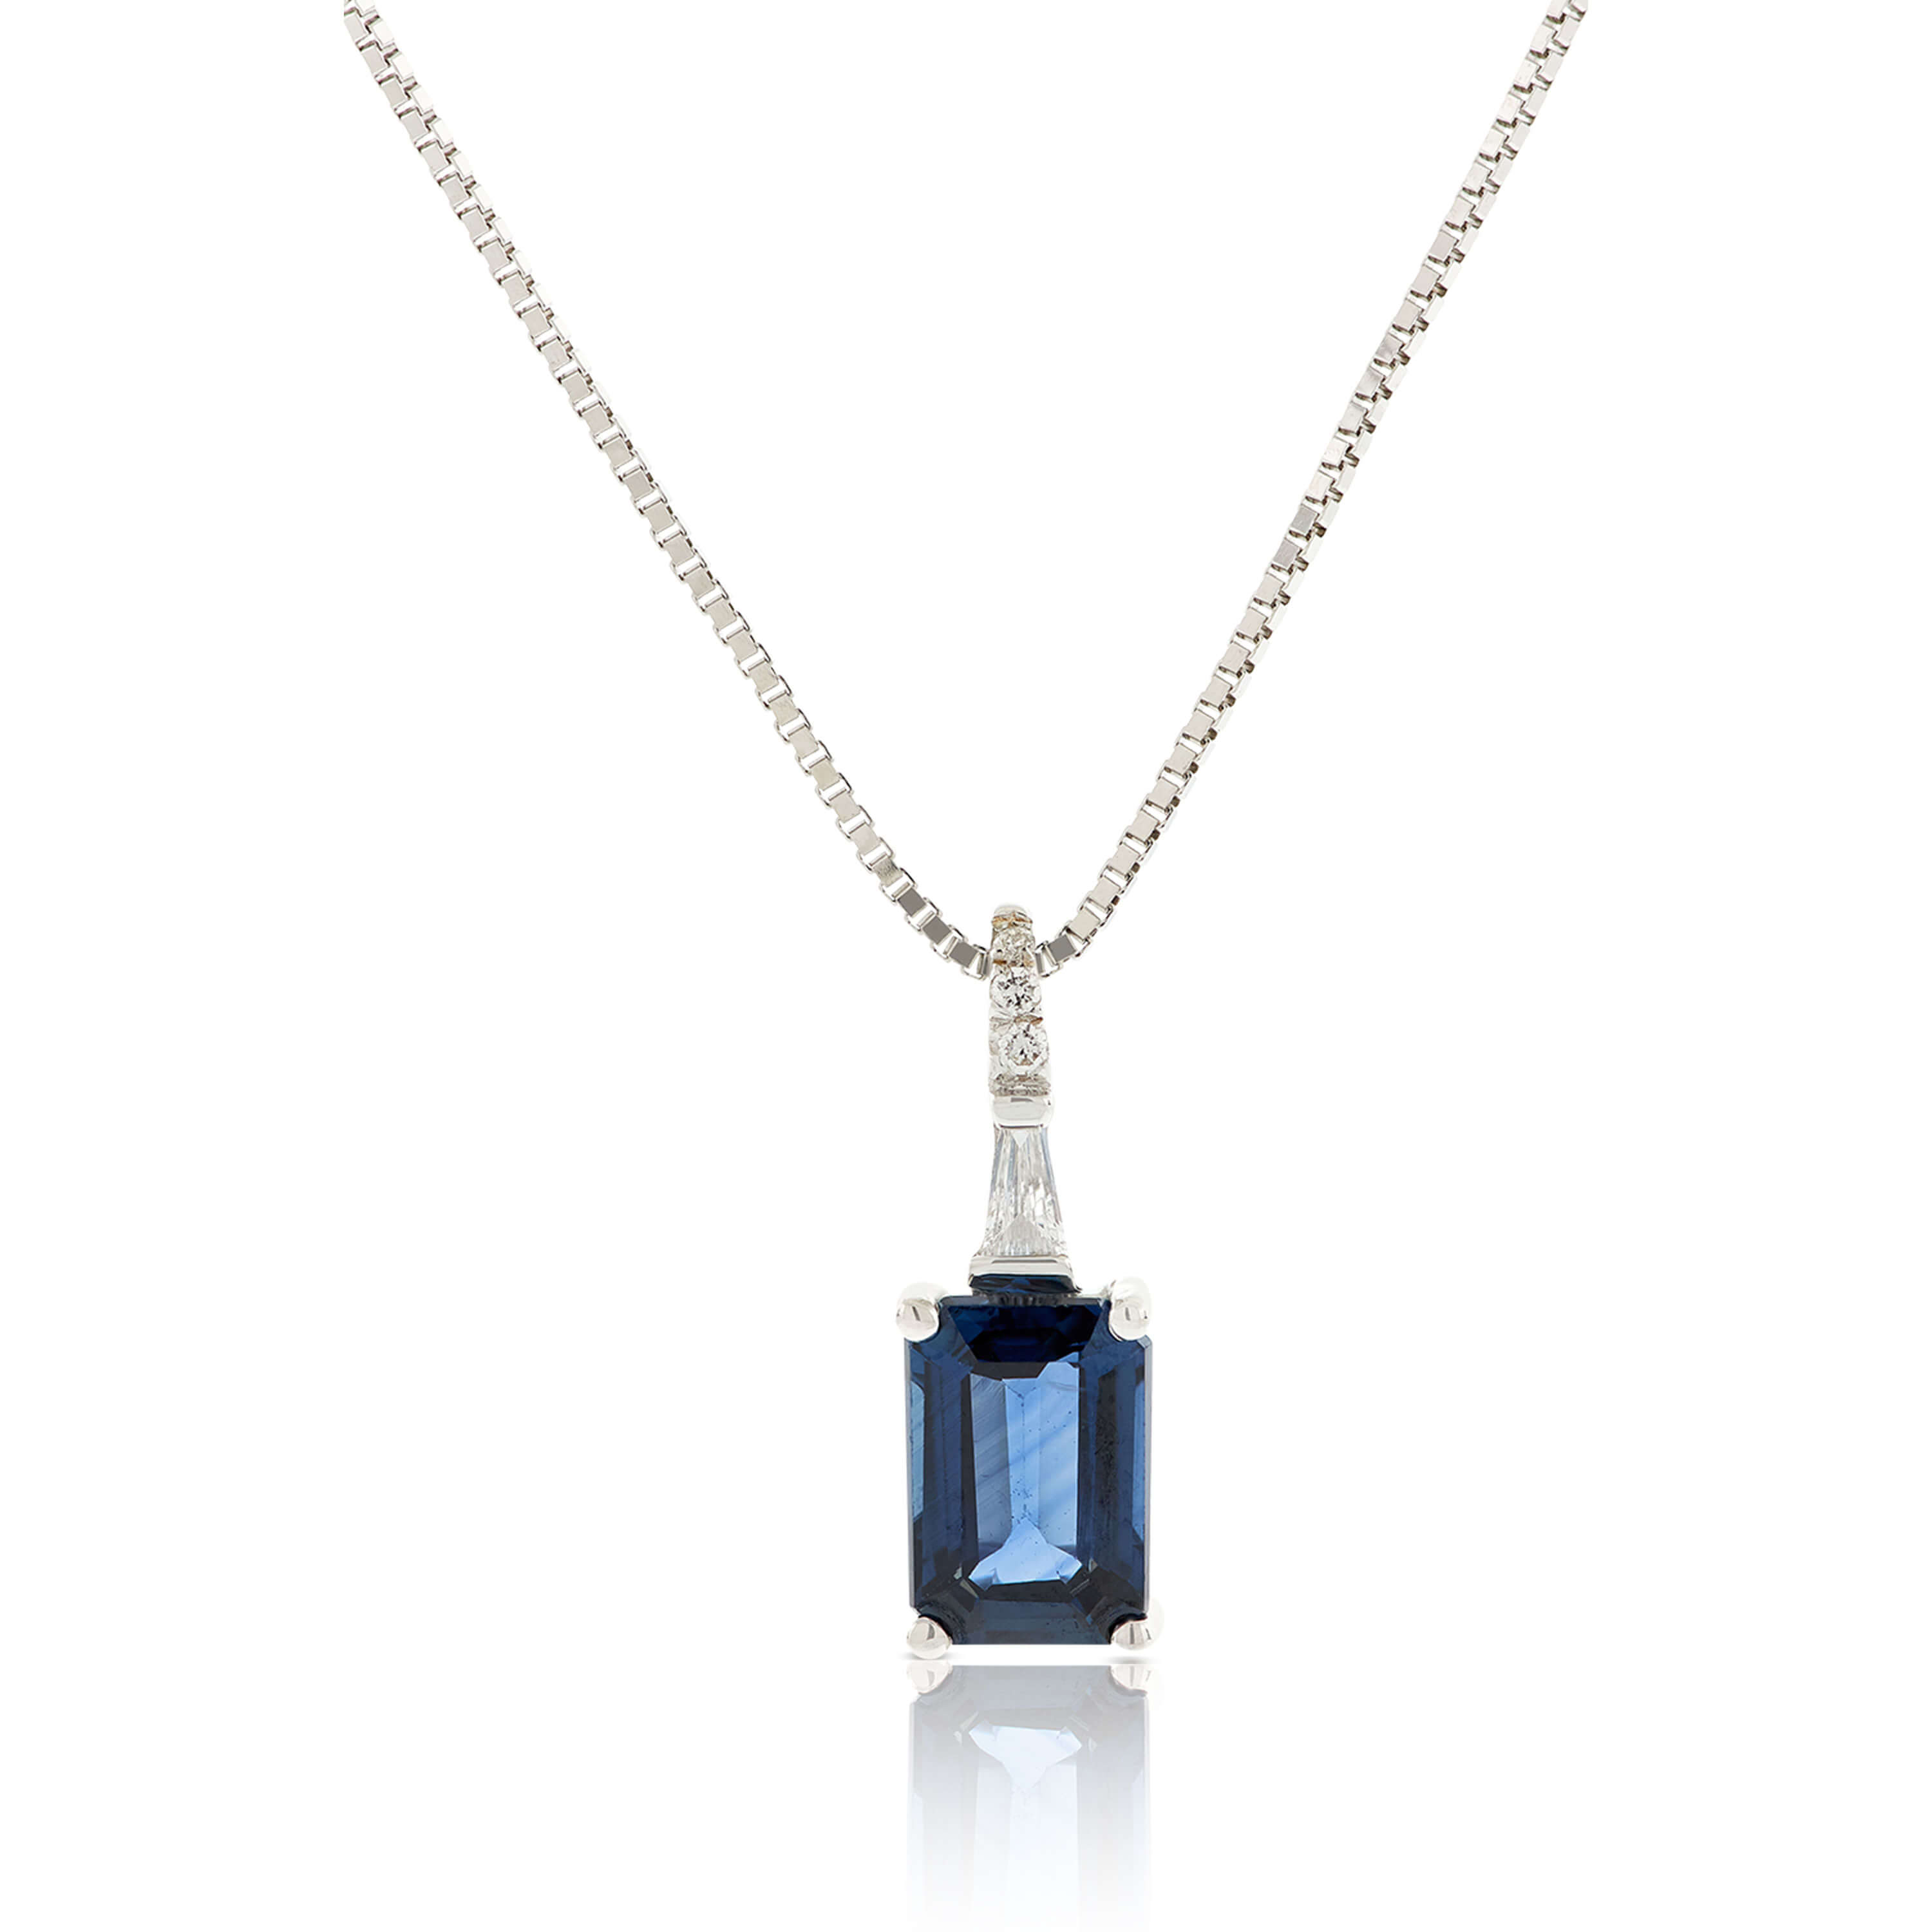 Emerald Cut Sapphire Necklace – Five Star Jewelry Brokers